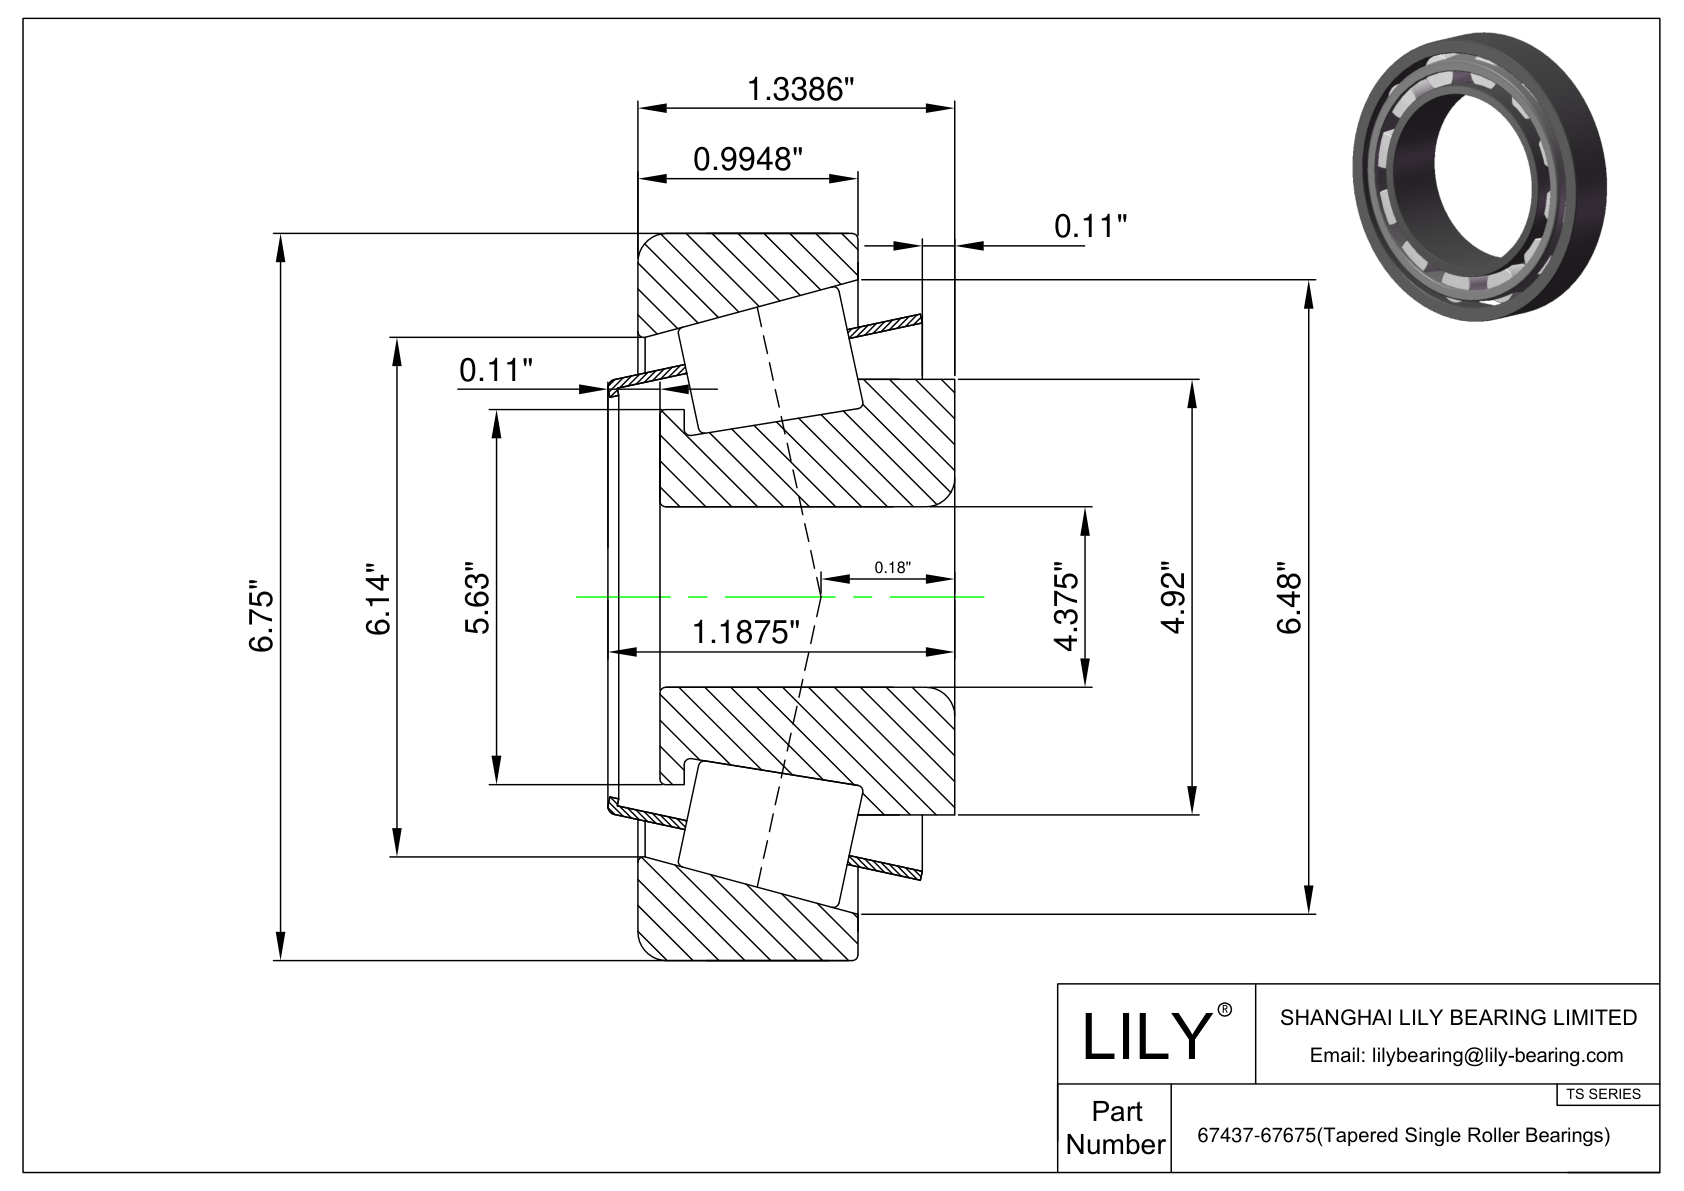 67437-67675 TS (Tapered Single Roller Bearings) (Imperial) cad drawing